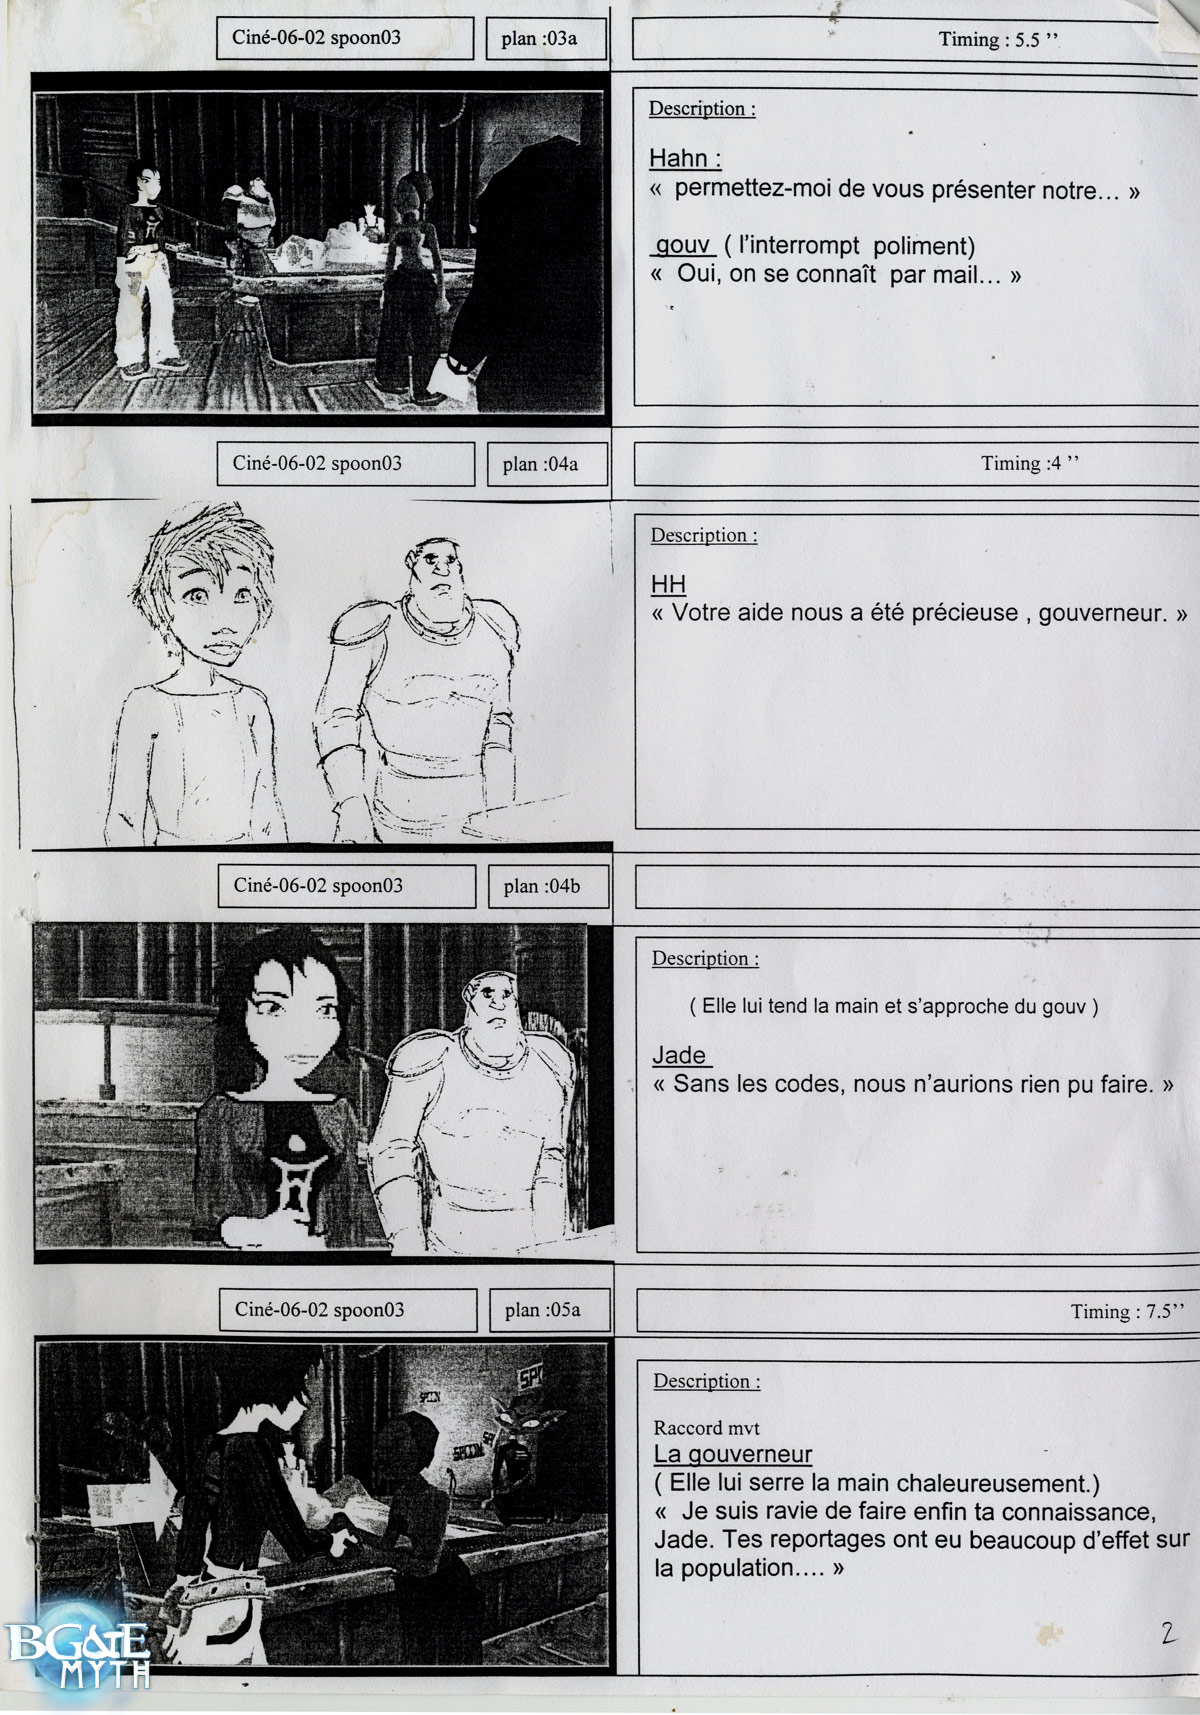 [Storyboard] Marcassin appelle IRIS - Page 2